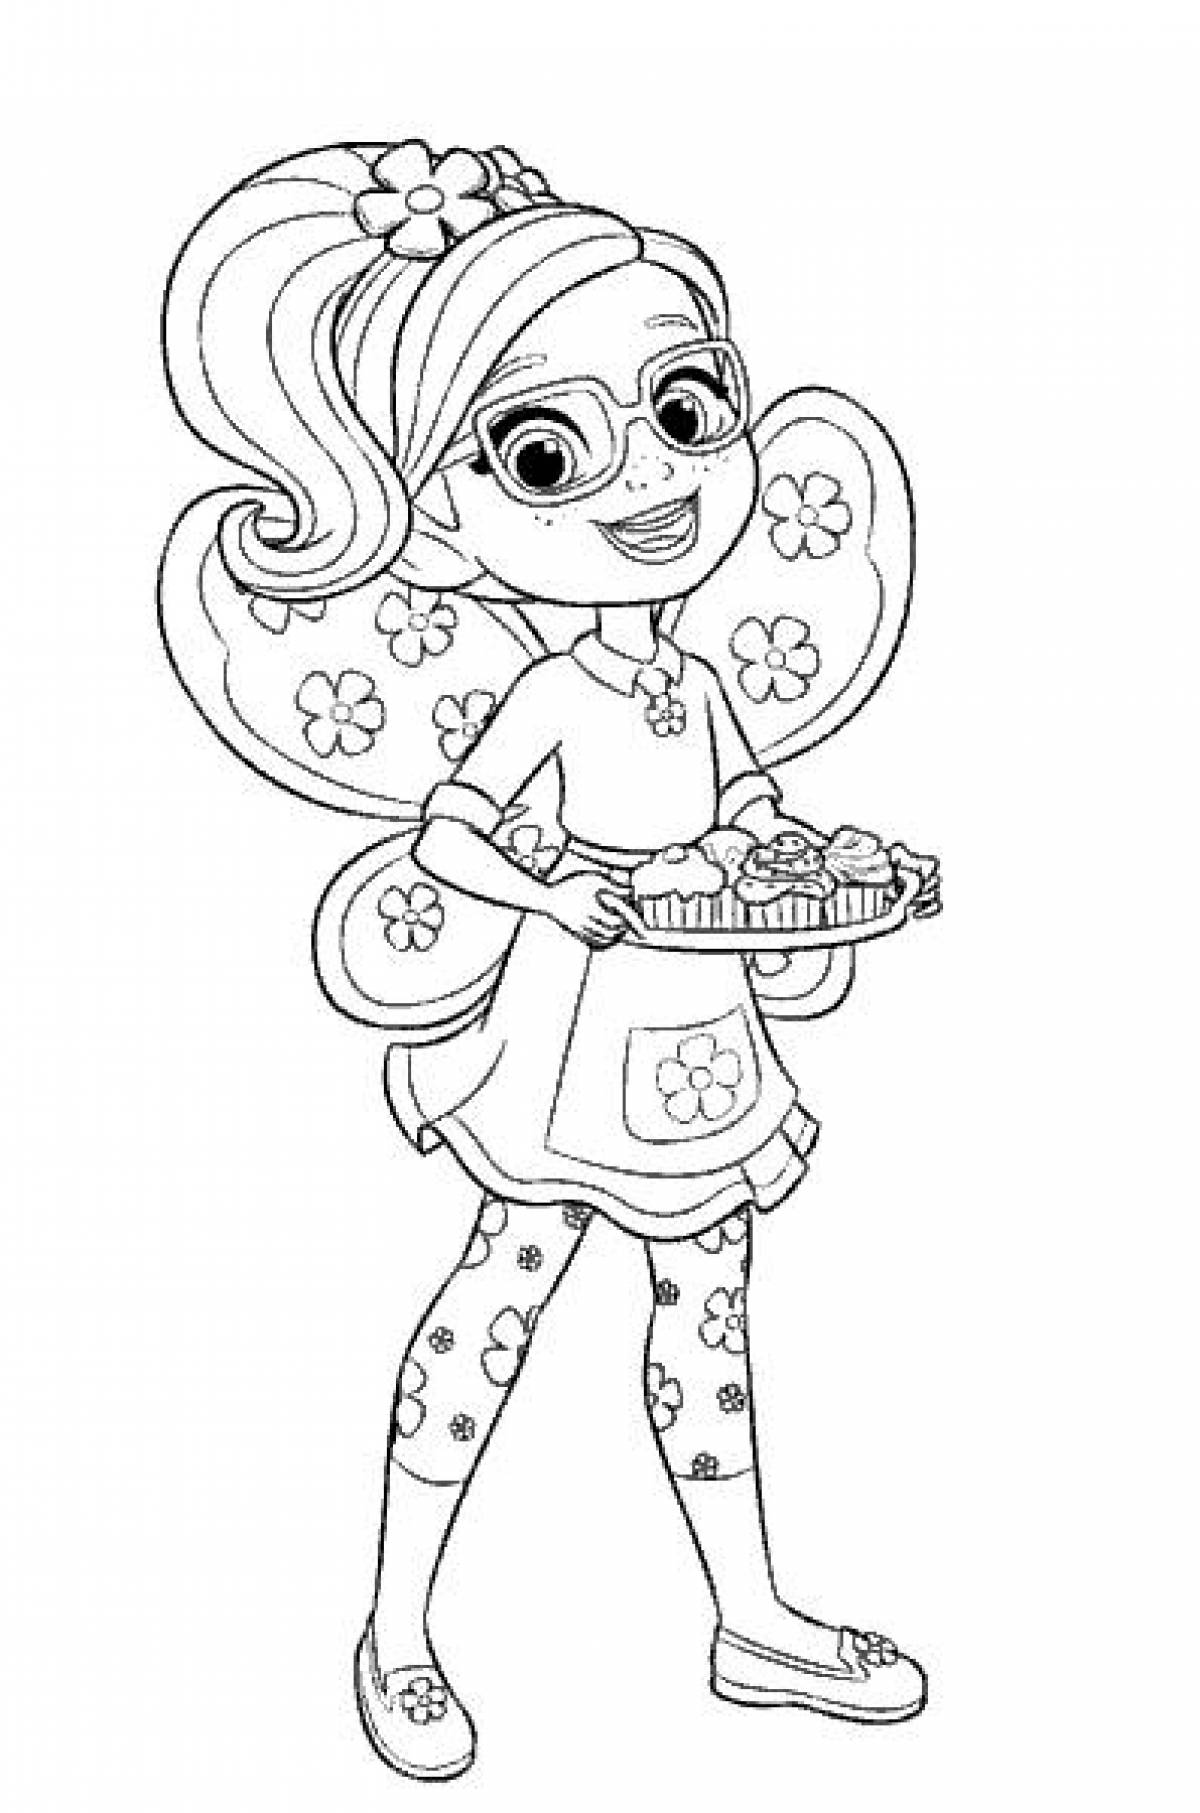 Coloring game time with bright poppy